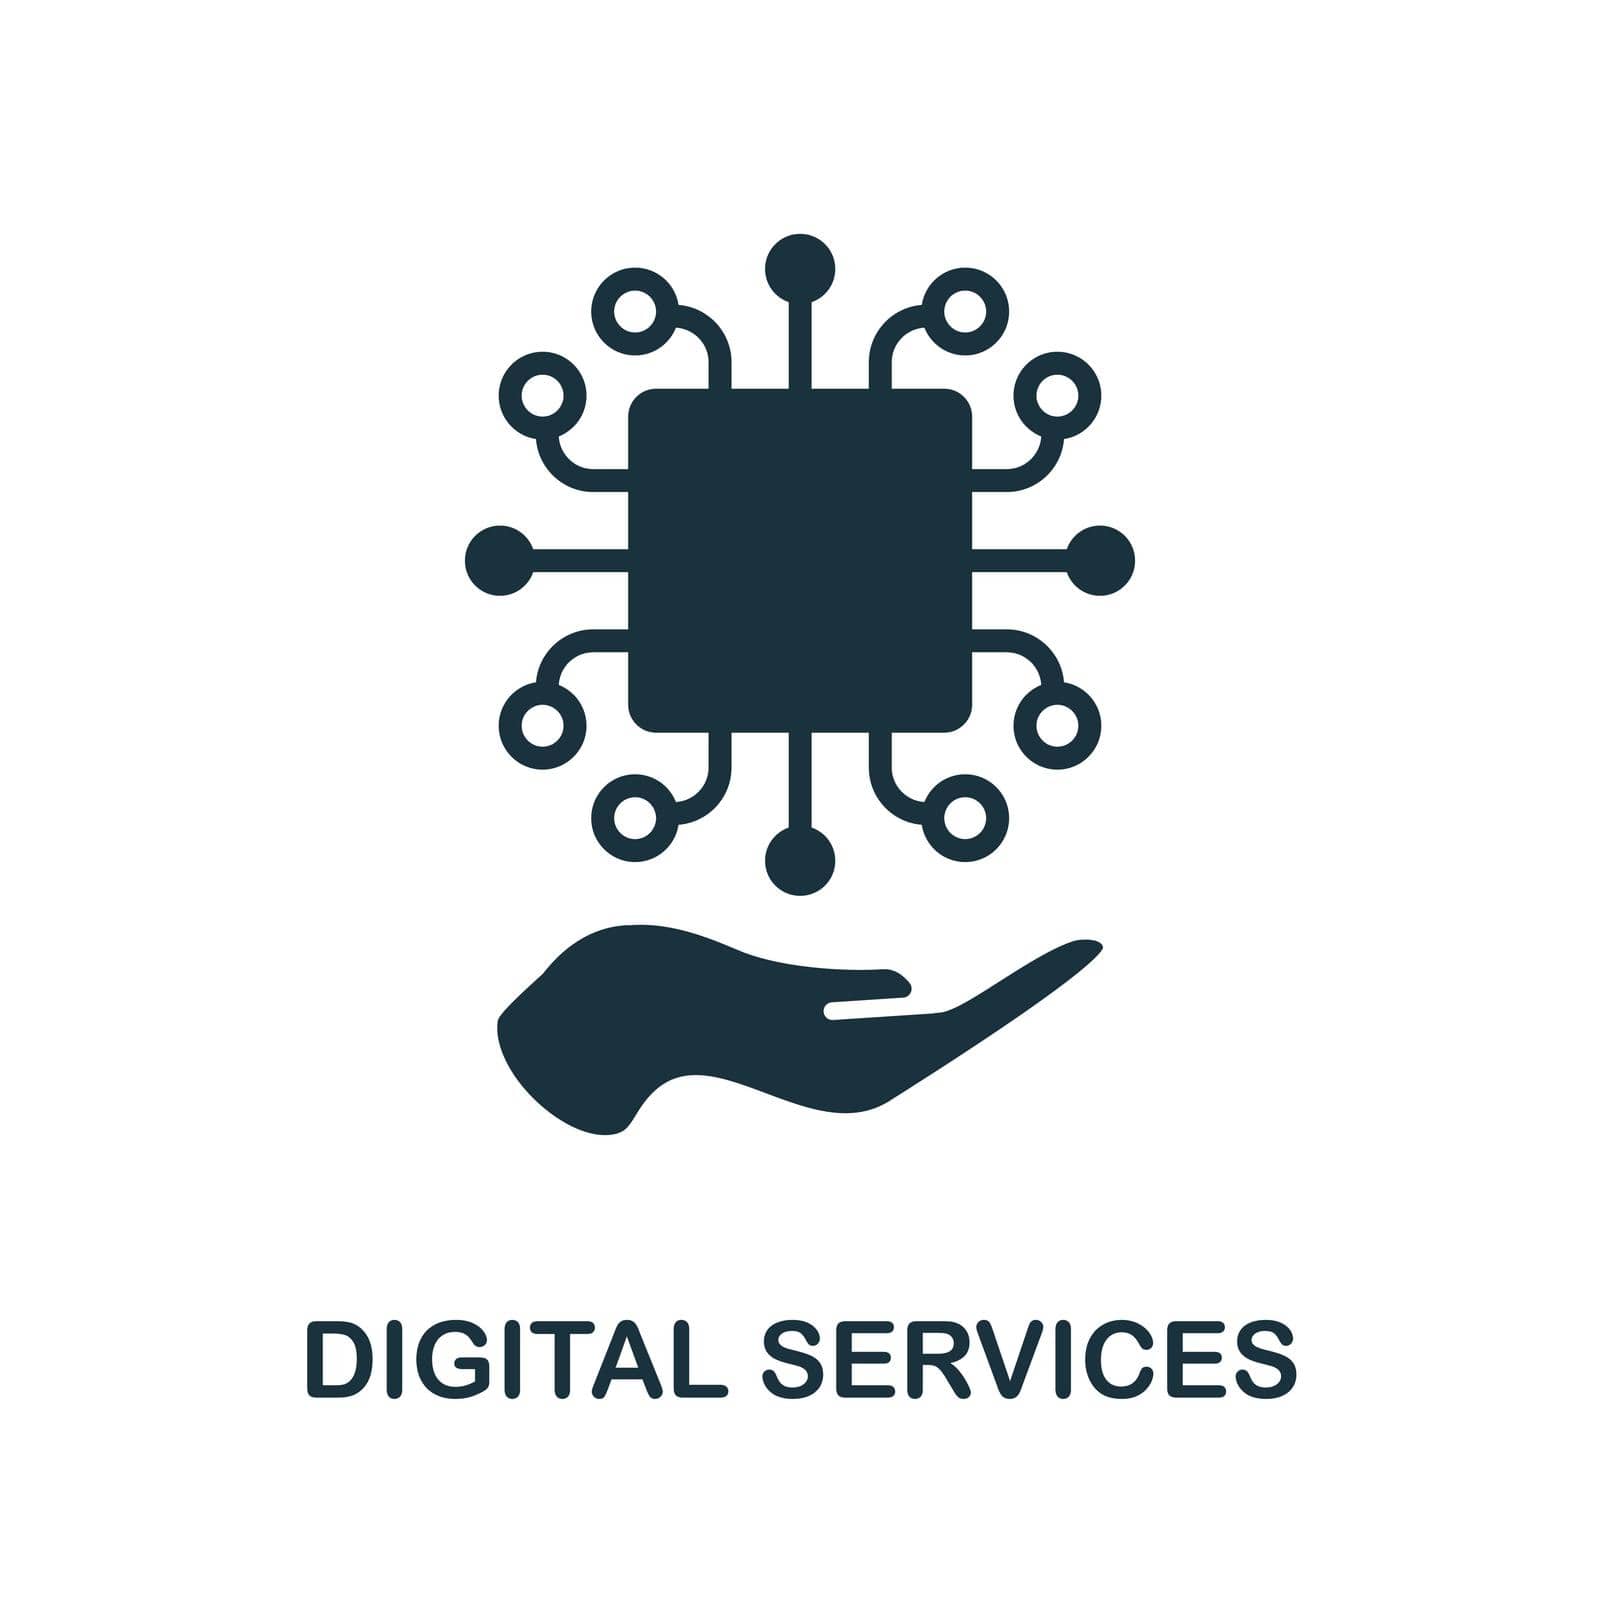 Digital Services icon. Monochrome simple Digital Services icon for templates, web design and infographics by simakovavector